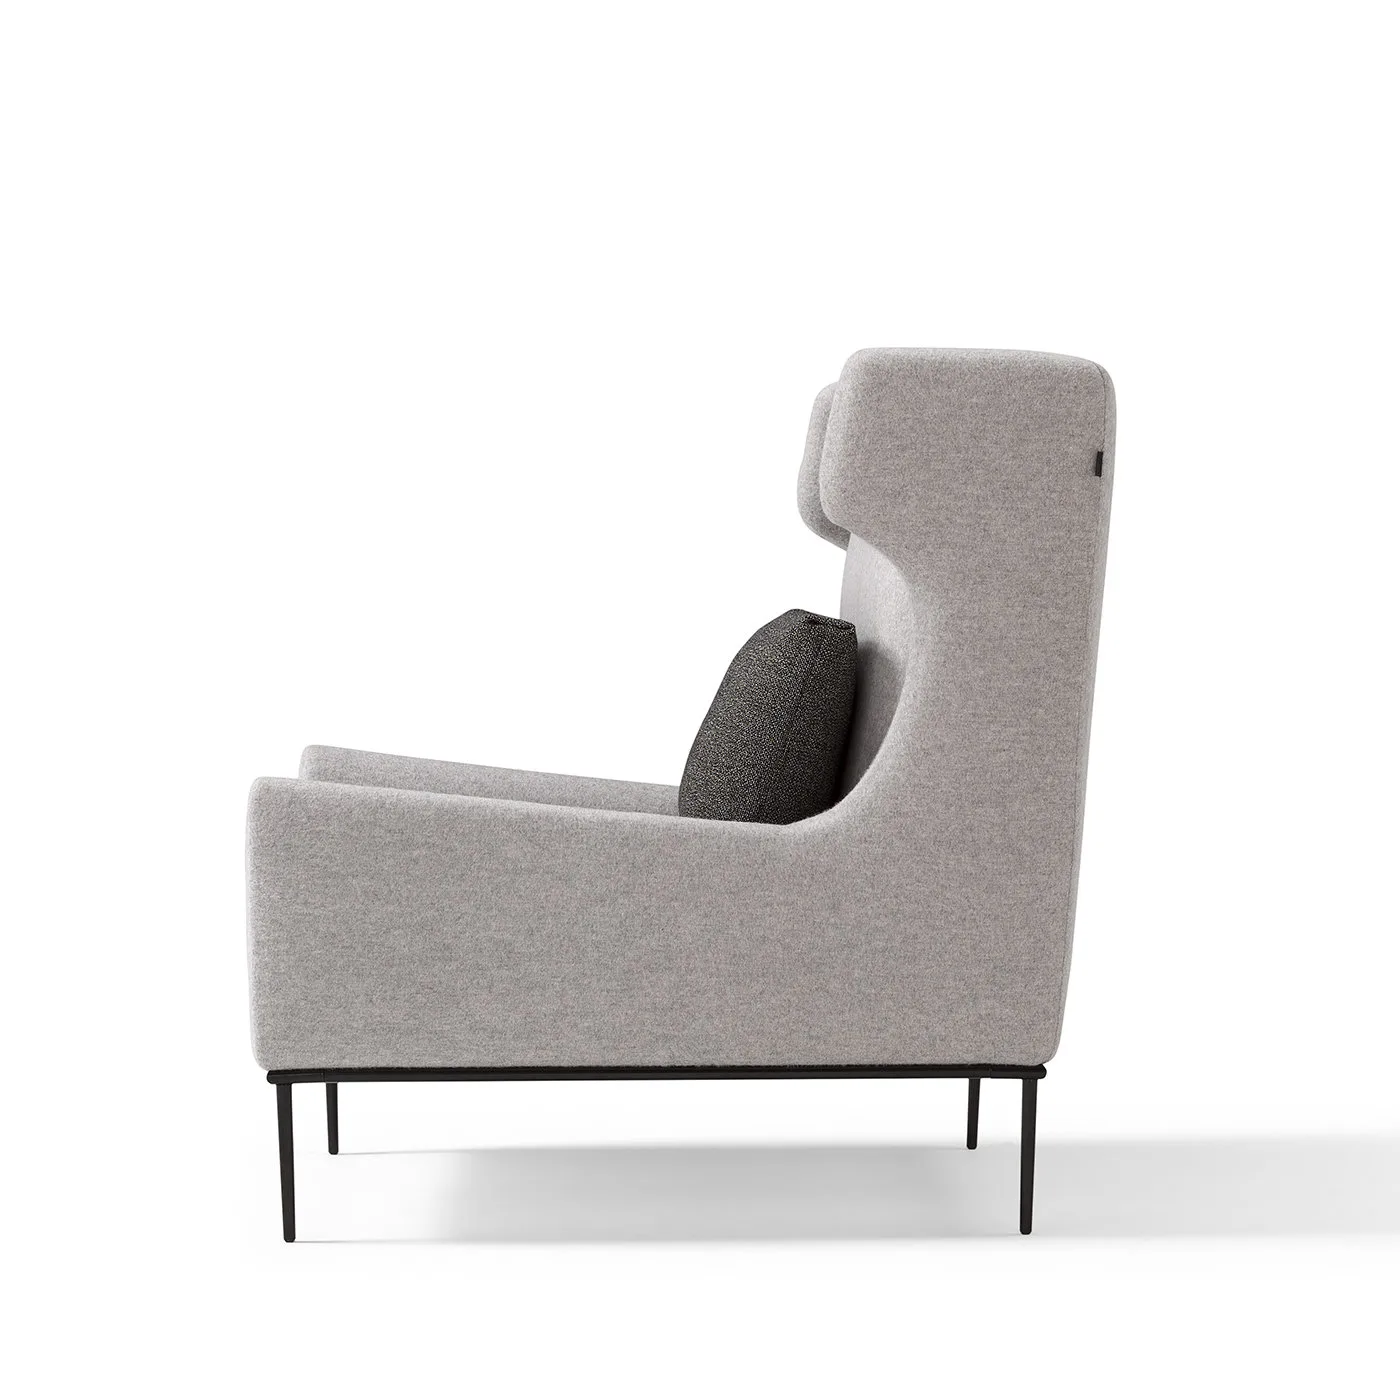 ALICE ARMCHAIR BY LUCA SCACCHETTI